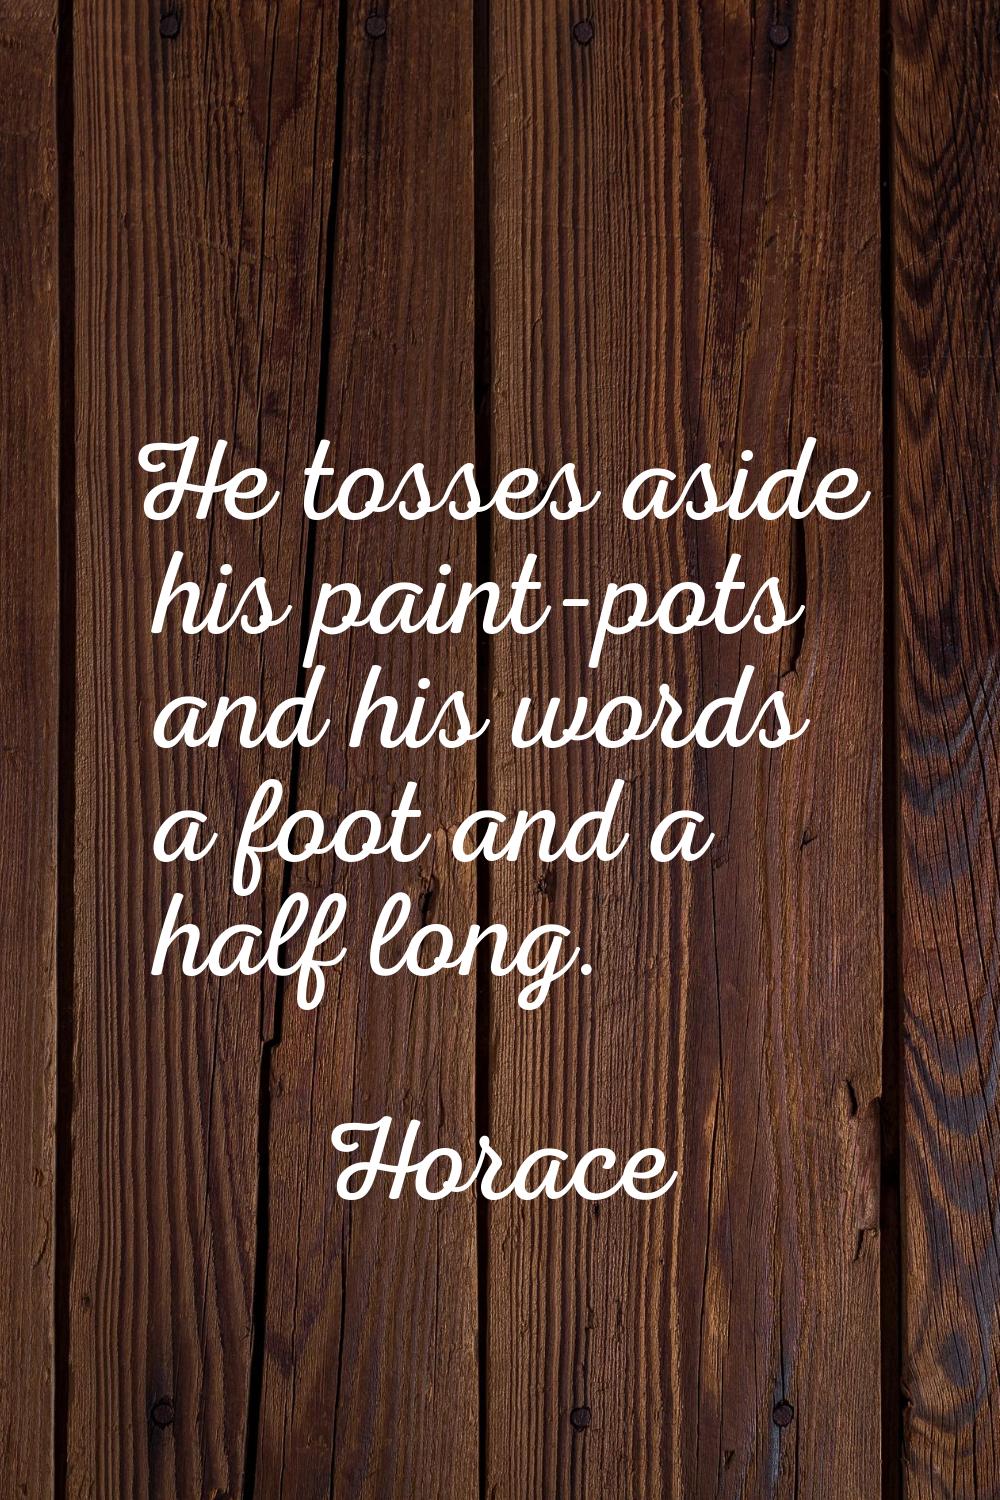 He tosses aside his paint-pots and his words a foot and a half long.